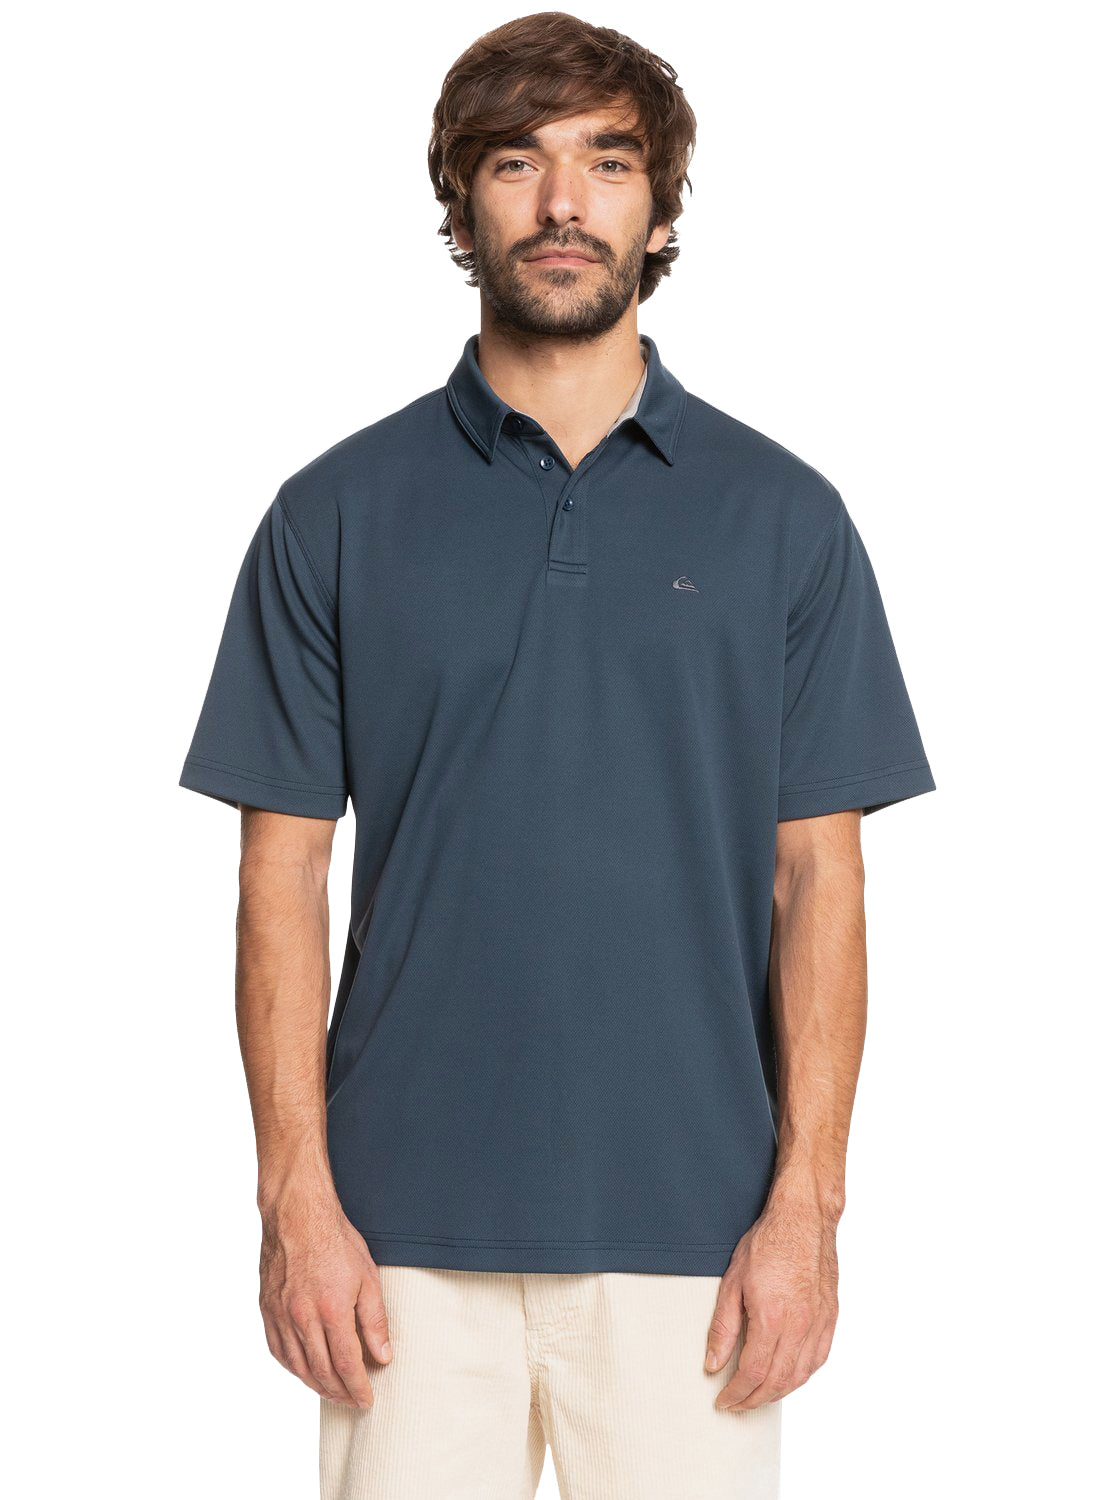 Quiksilver Waterman Water 2 Polo BSL0 L